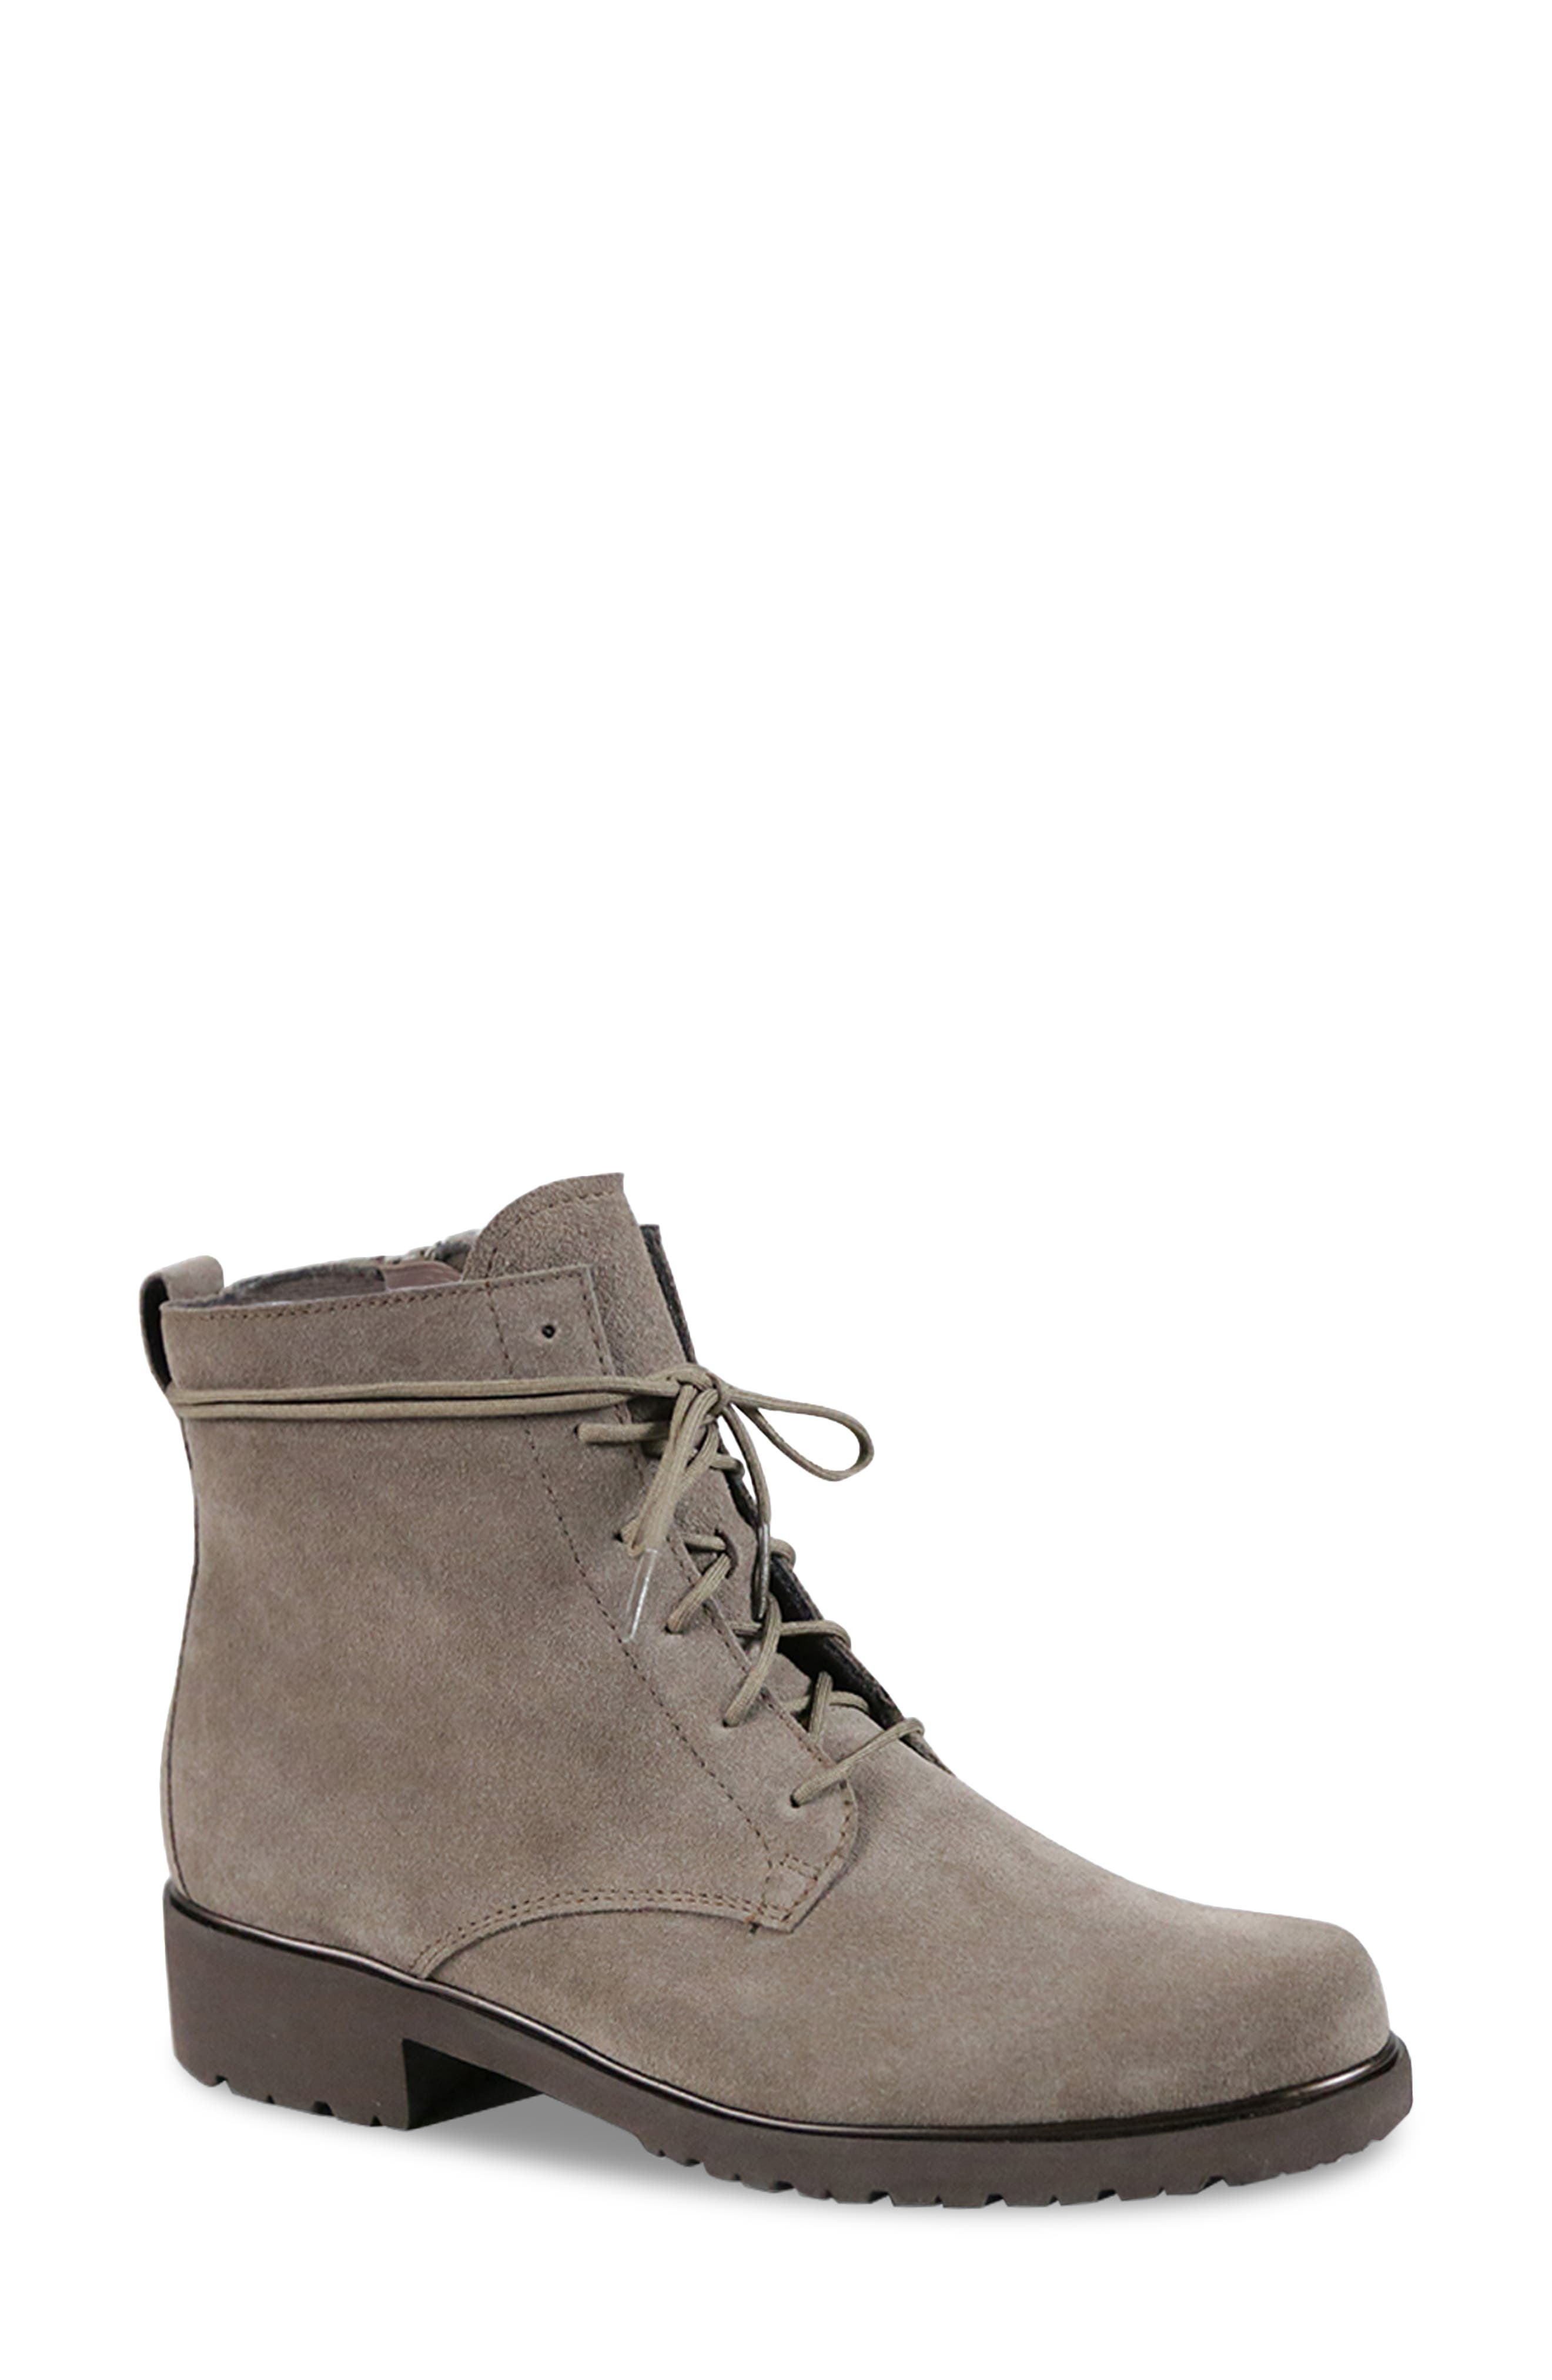 ankle boots nordstrom